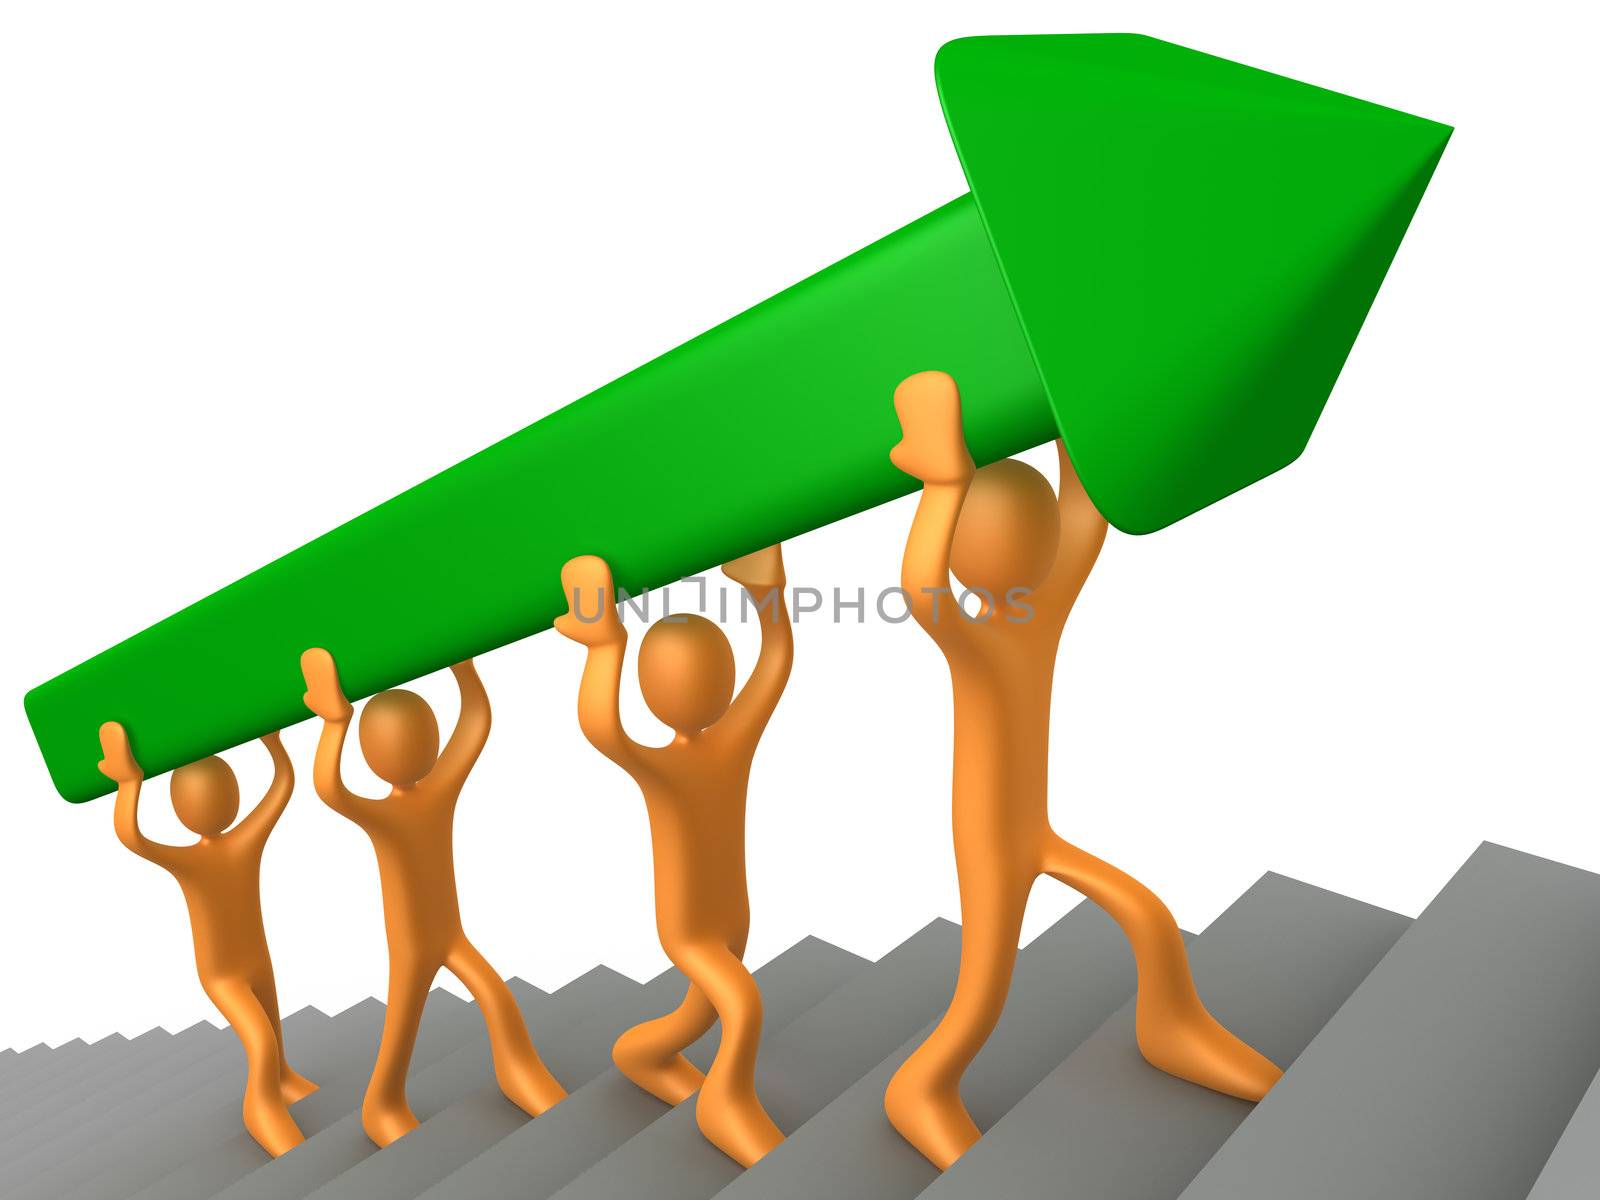 3d people going up some strairs carrying a green arrow. Metaphor of success and goals.